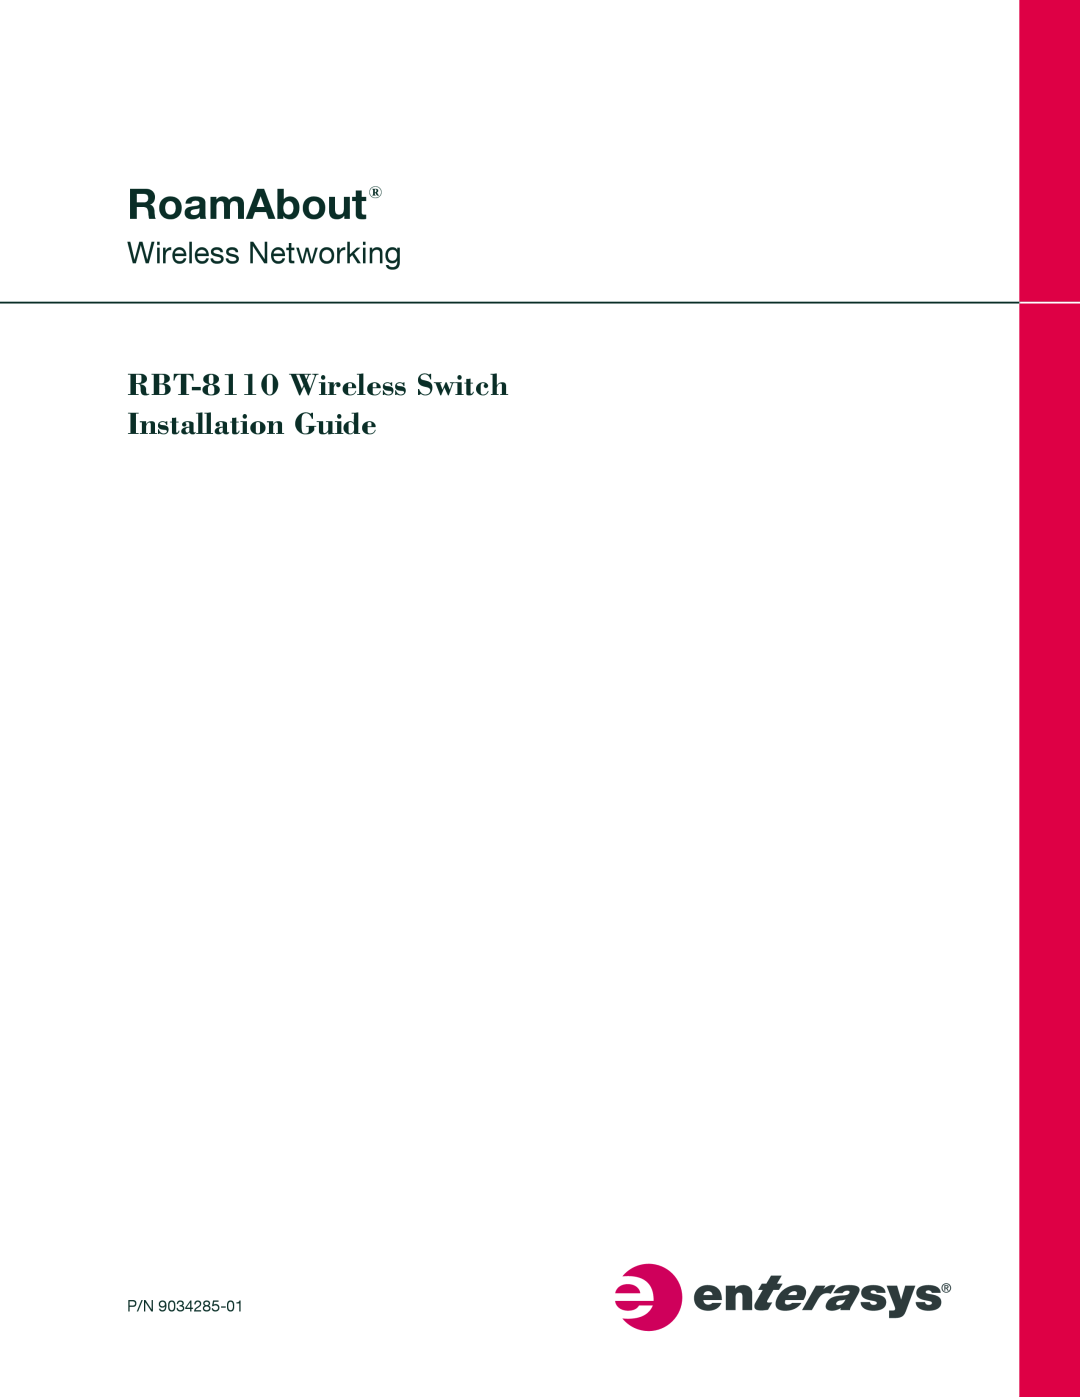 Enterasys Networks manual RoamAbout, RBT-8110 Wireless Switch Installation Guide, Wireless Networking 